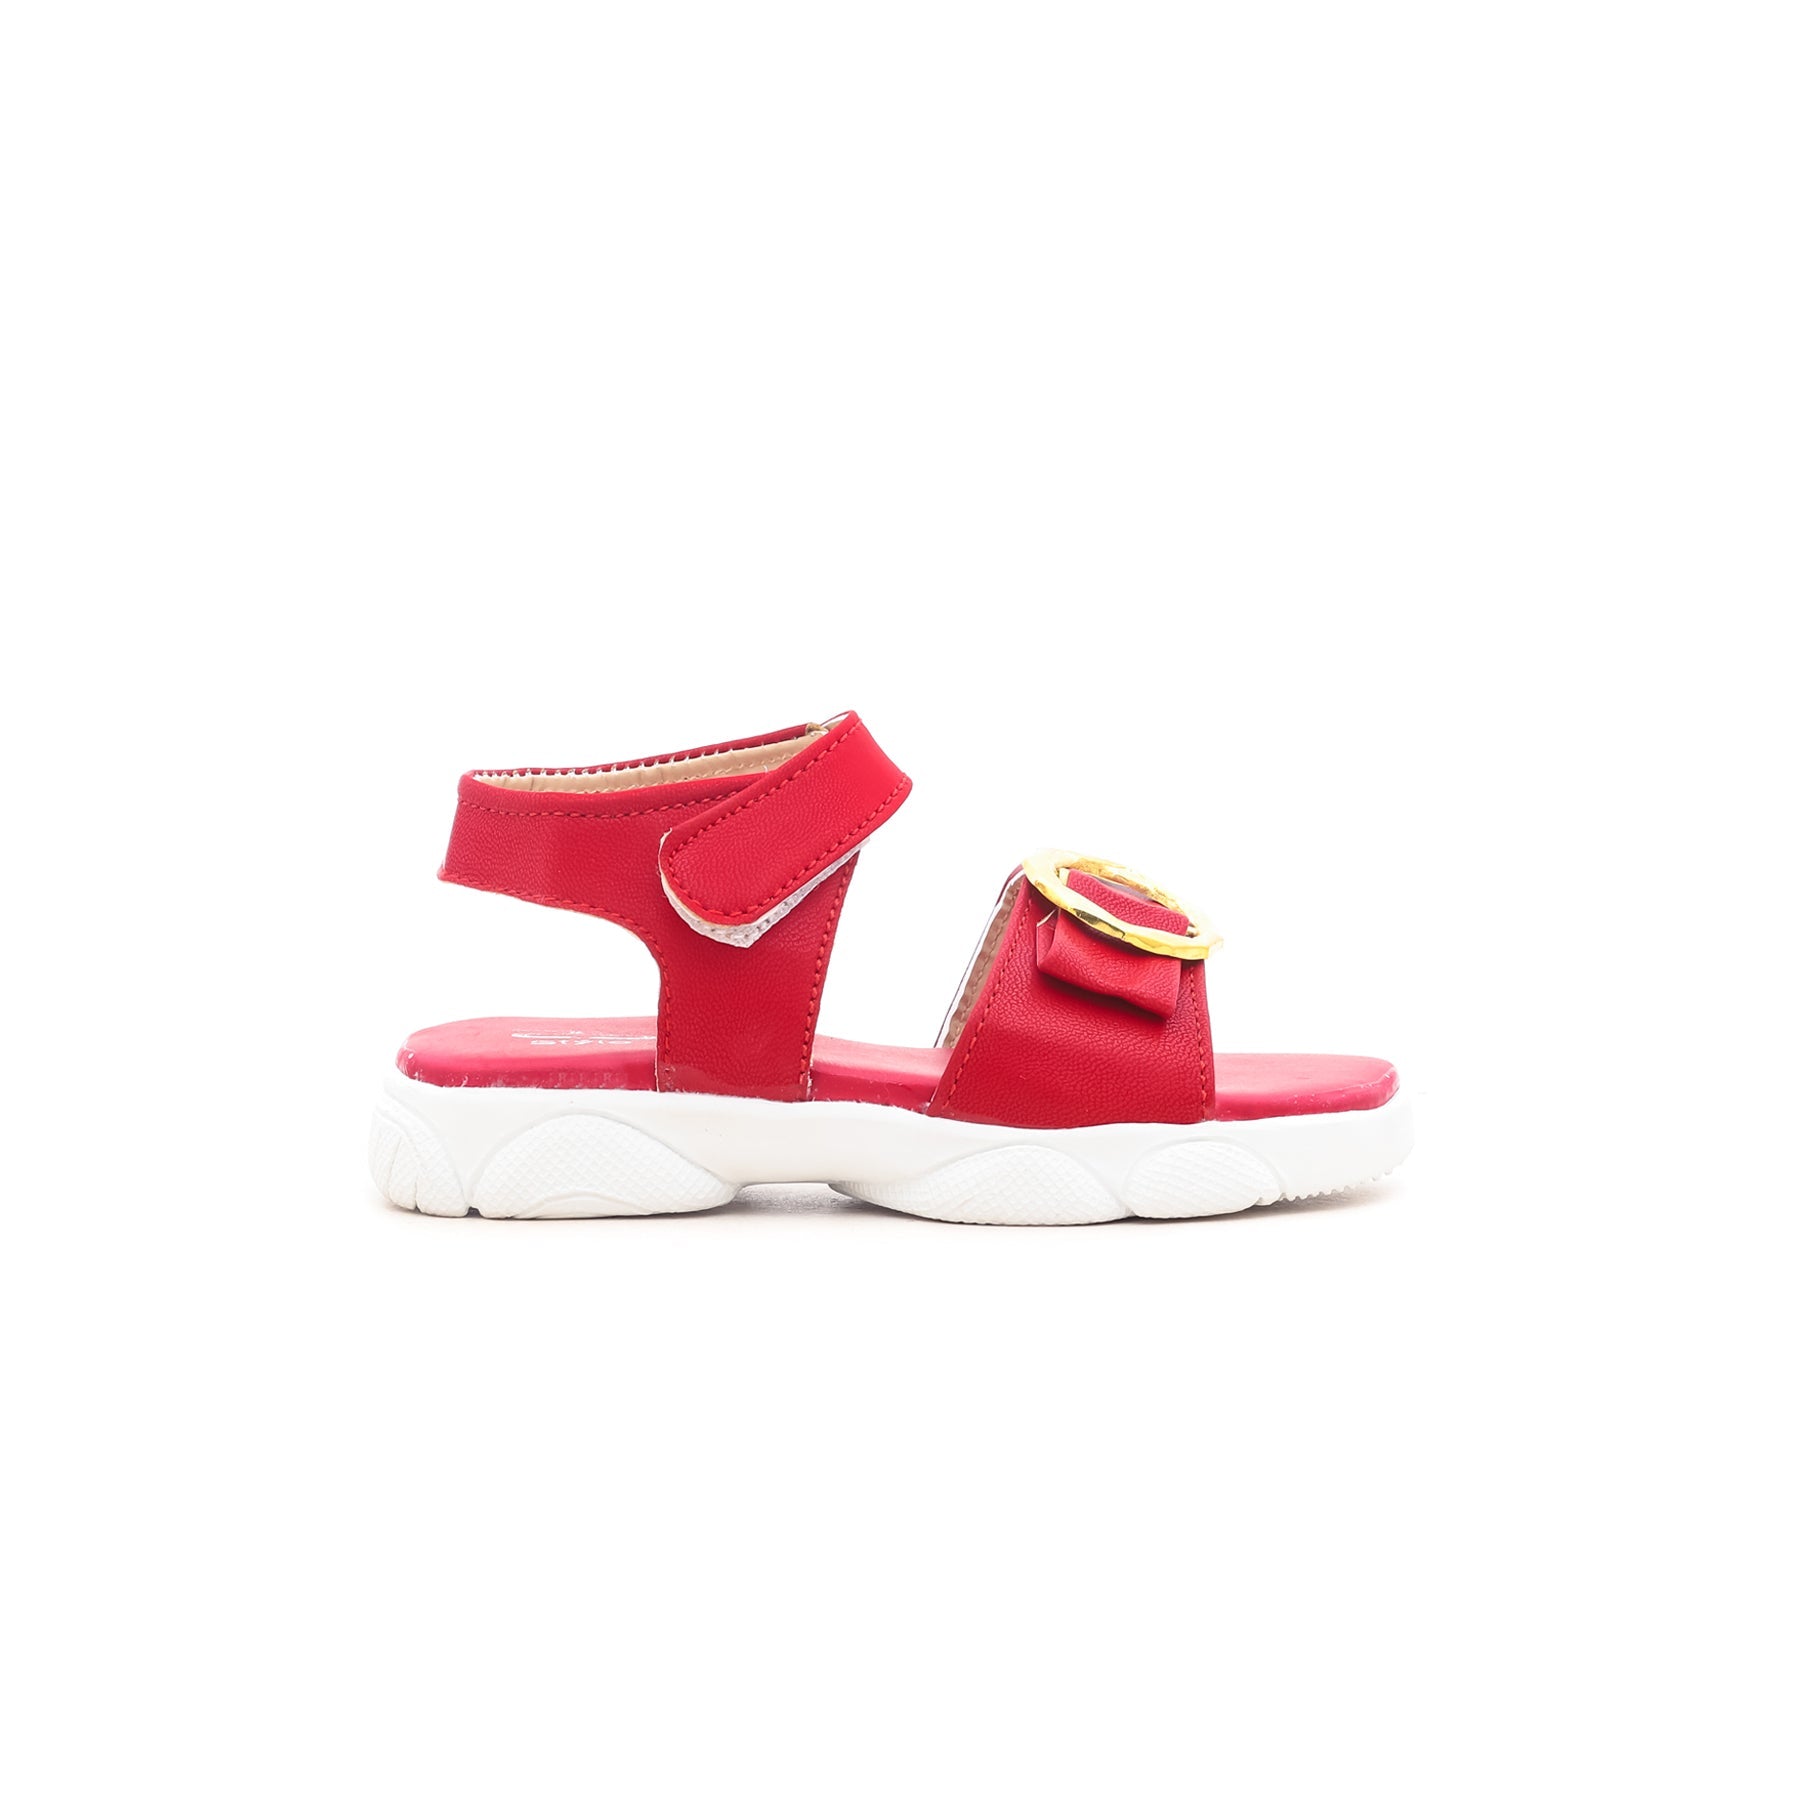 Girls Red Casual Sandal KD7410